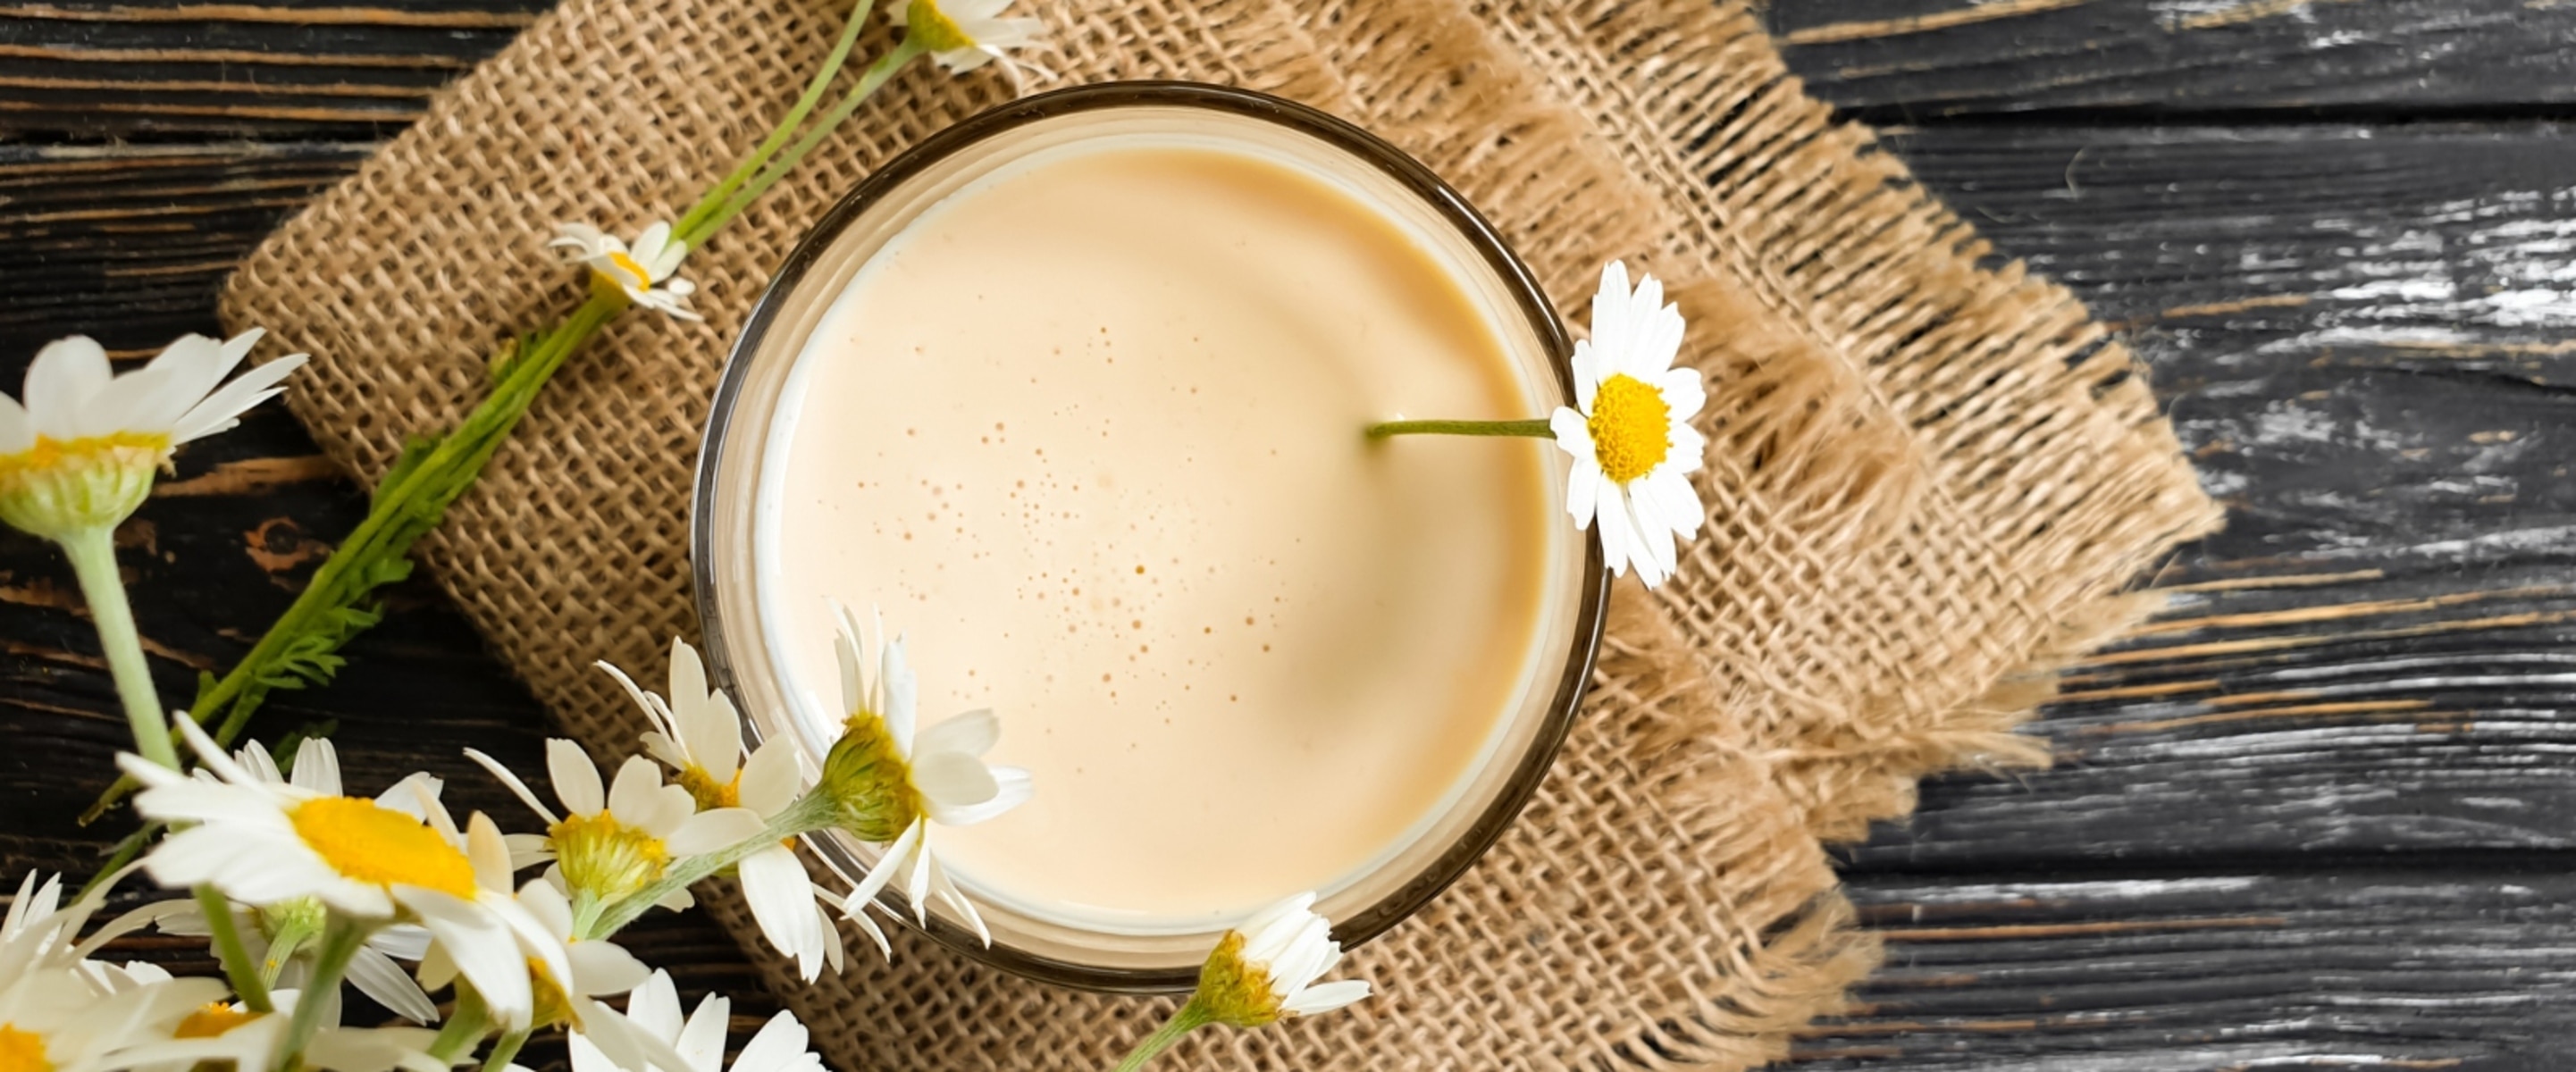 What Is Chamomile Milk? Why This Soothing Beverage Could Help You Sleep